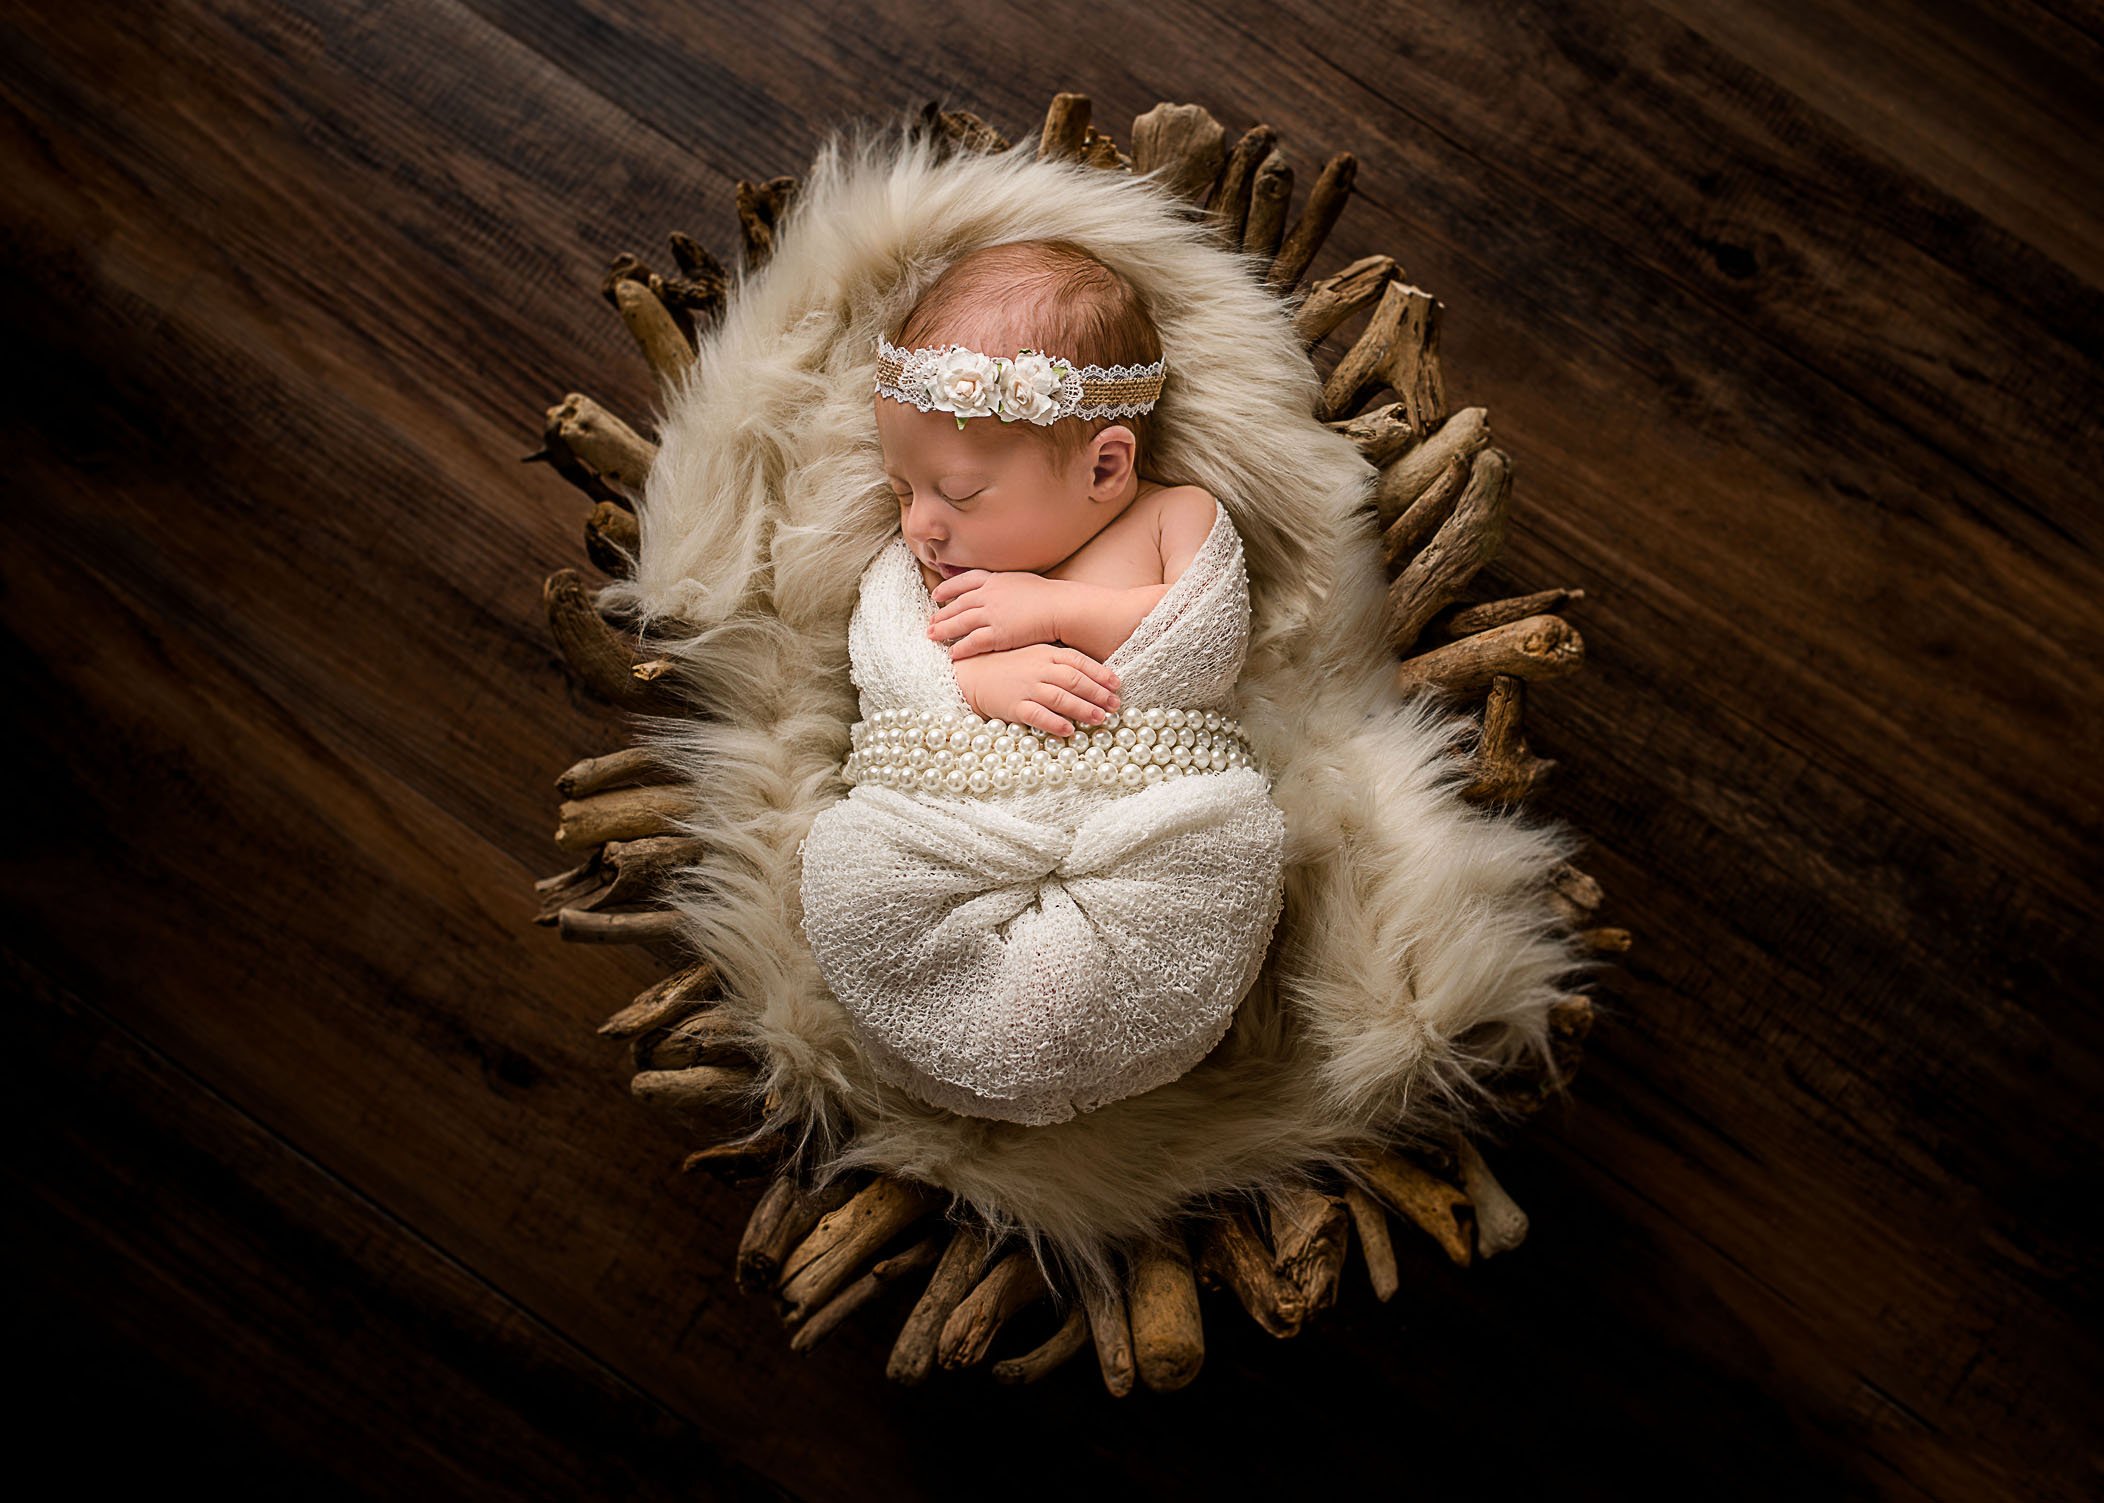 newborn baby sleeping swaddled in driftwood bowl and fur draped in long strands of pearls